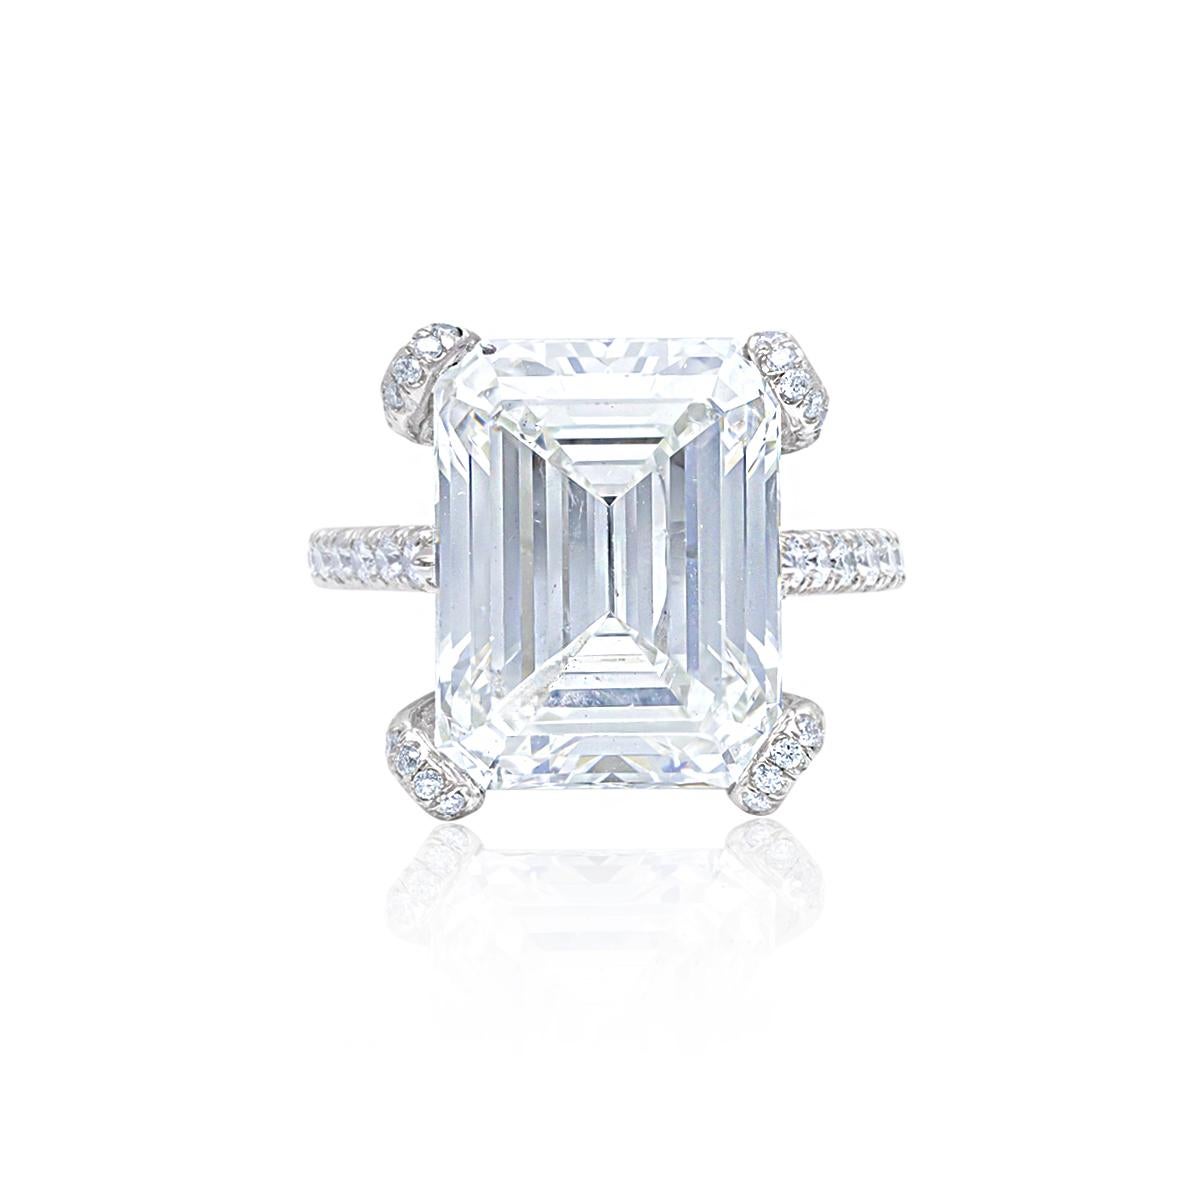 18 kt white gold engagement ring featuring a center 10.76 ct emerald cut diamond(GIA#2225104157) (J-SI1) with 1.00 cts tw of micro pave round brilliant diamonds on the band and on the prongs(G/H VS/SI)
Diana M is one-stop shop for all your jewelry